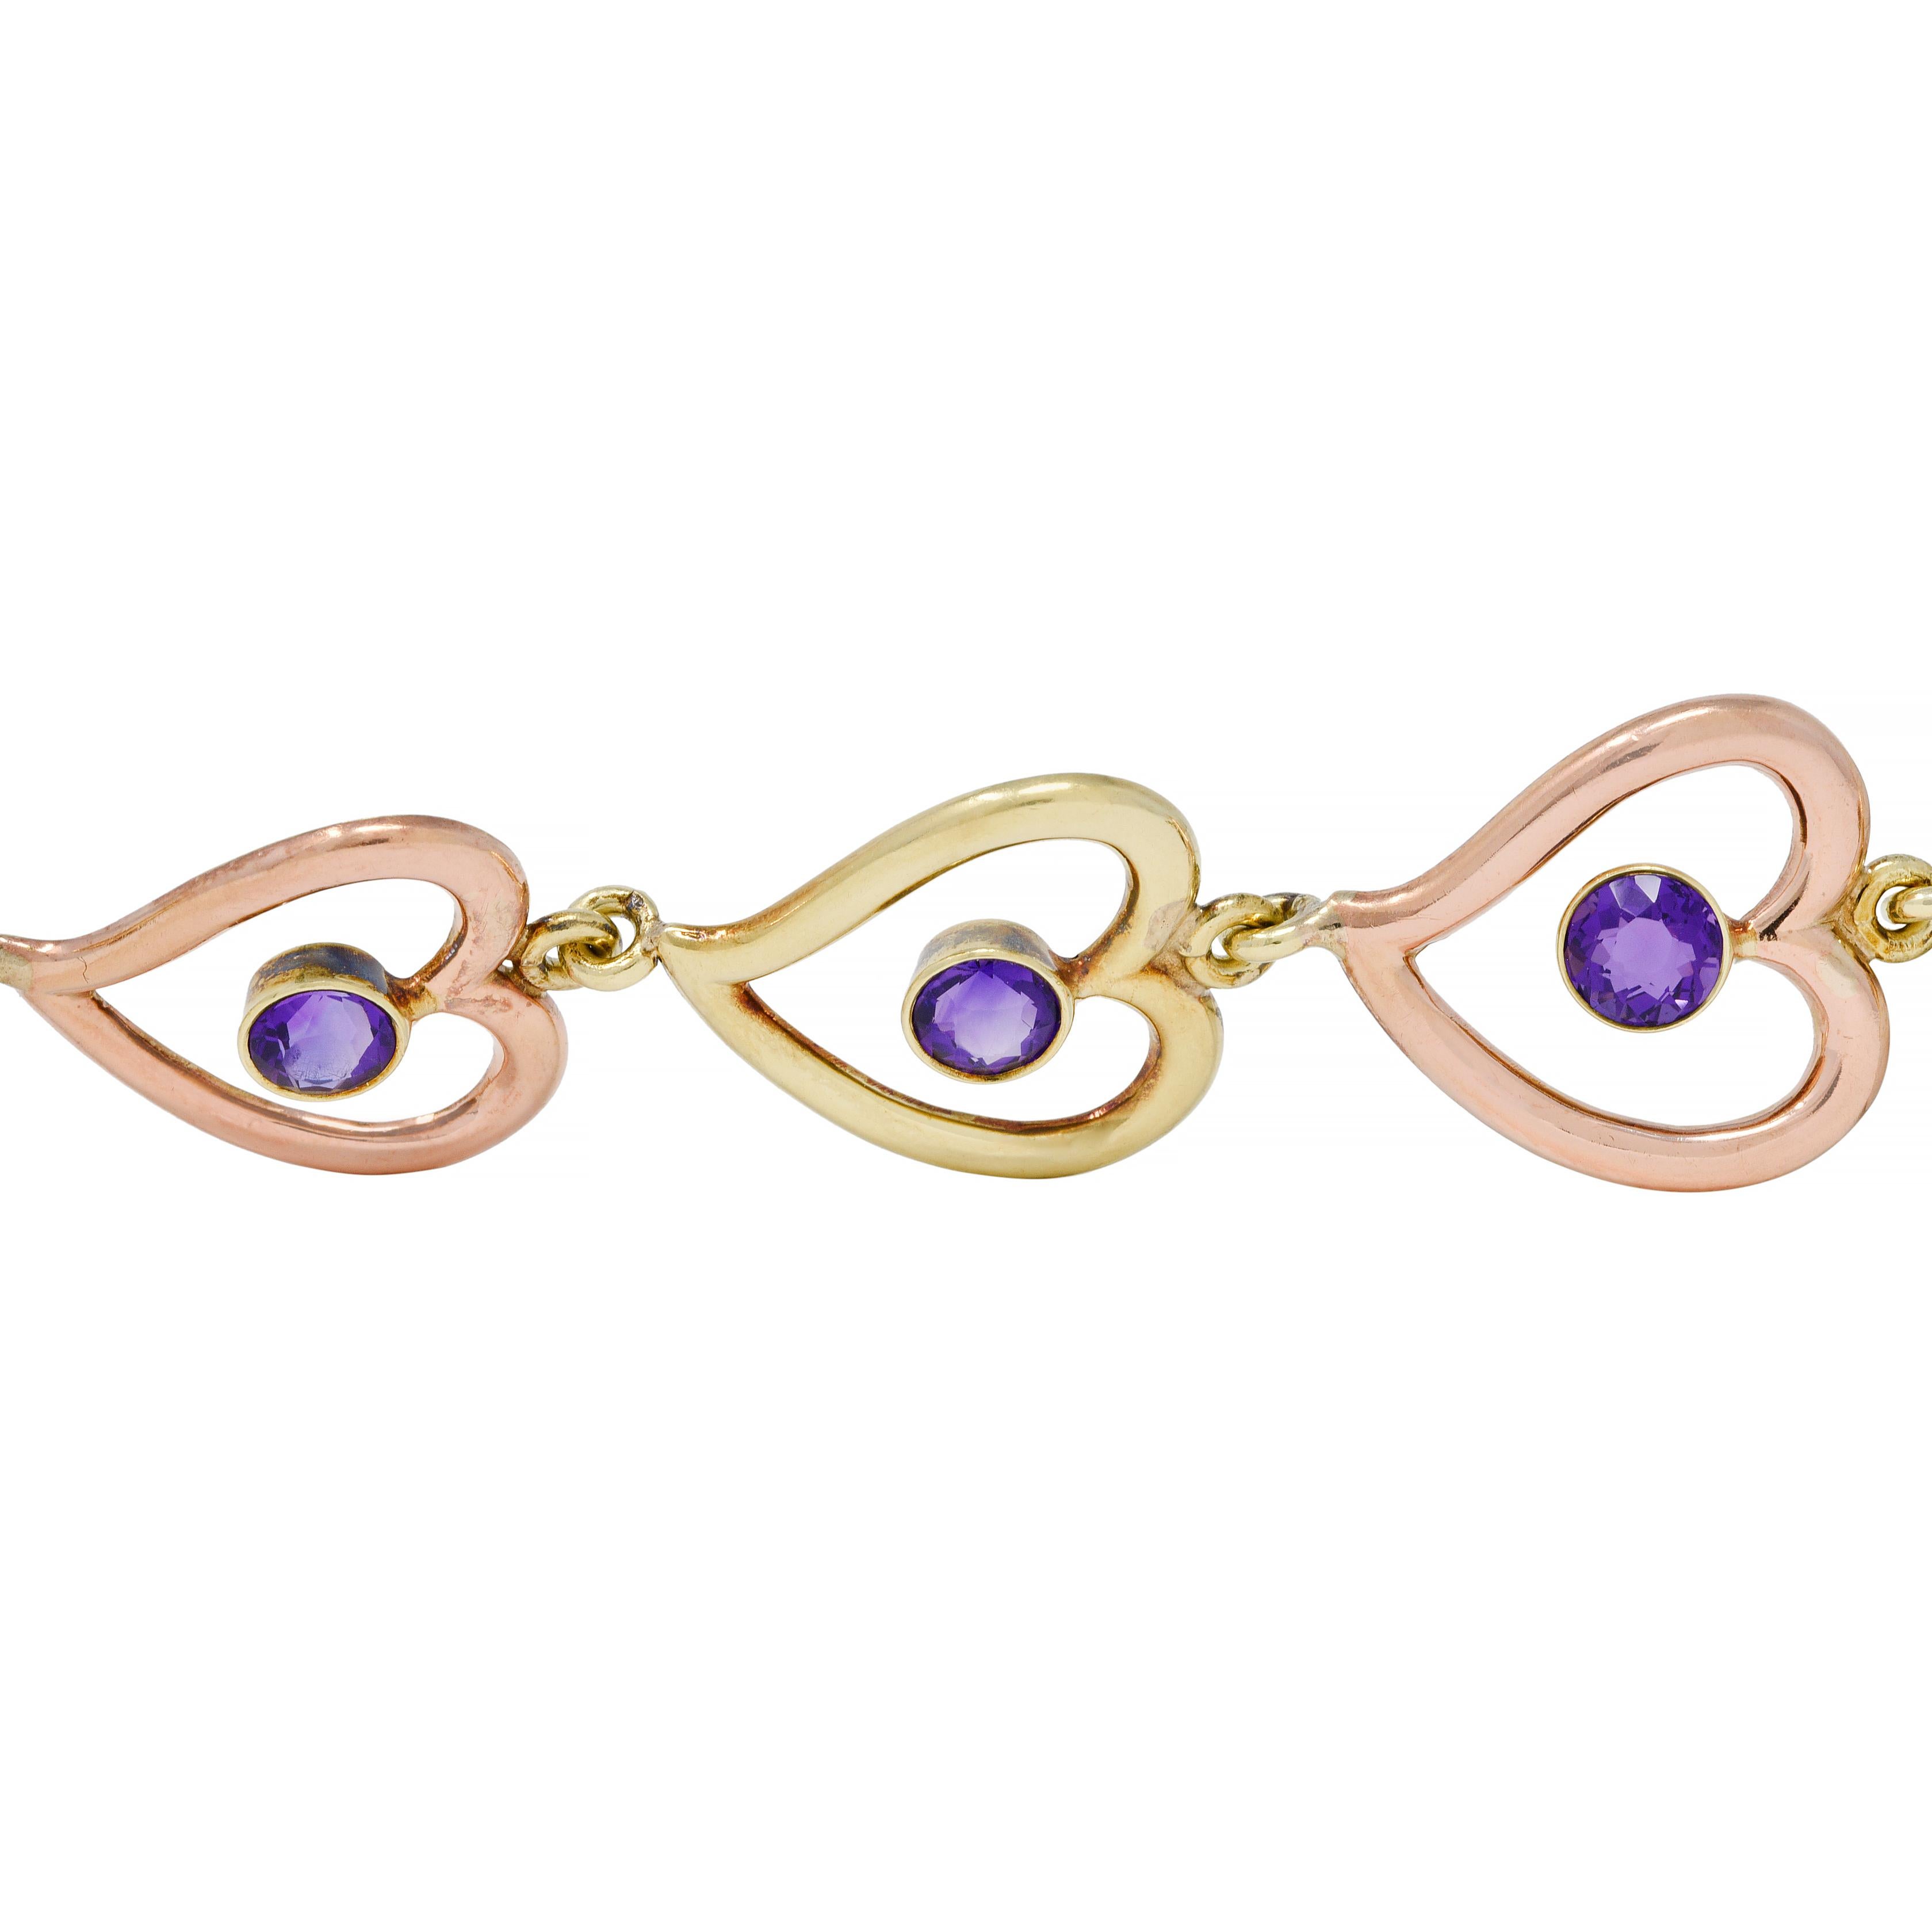 Retro Amethyst 14 Karat Two-Tone Gold Witches Heart Link Vintage Bracelet In Excellent Condition For Sale In Philadelphia, PA